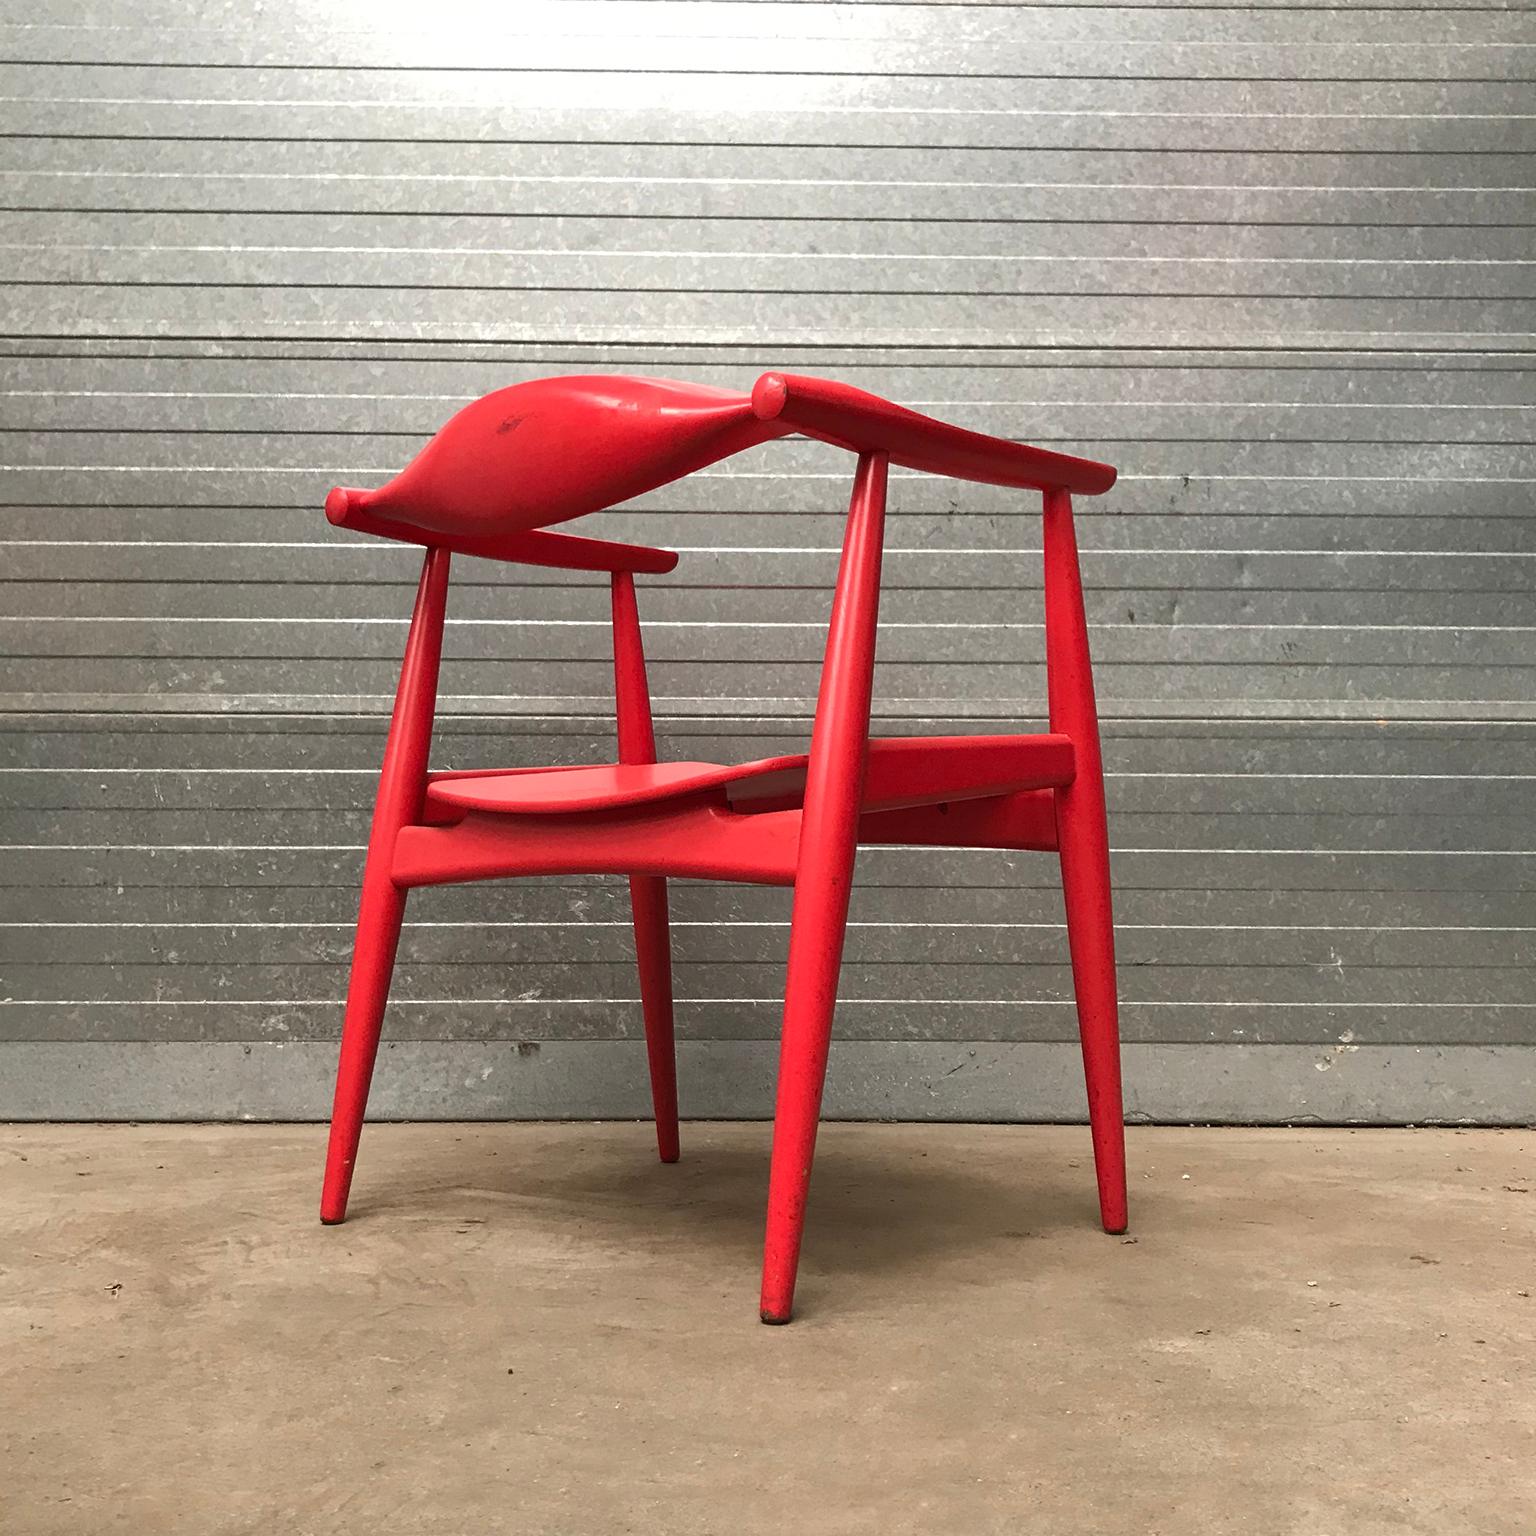 Very Rare Wegner Side Chair in Originally Red Painted Wood, circa 1930 For Sale 1